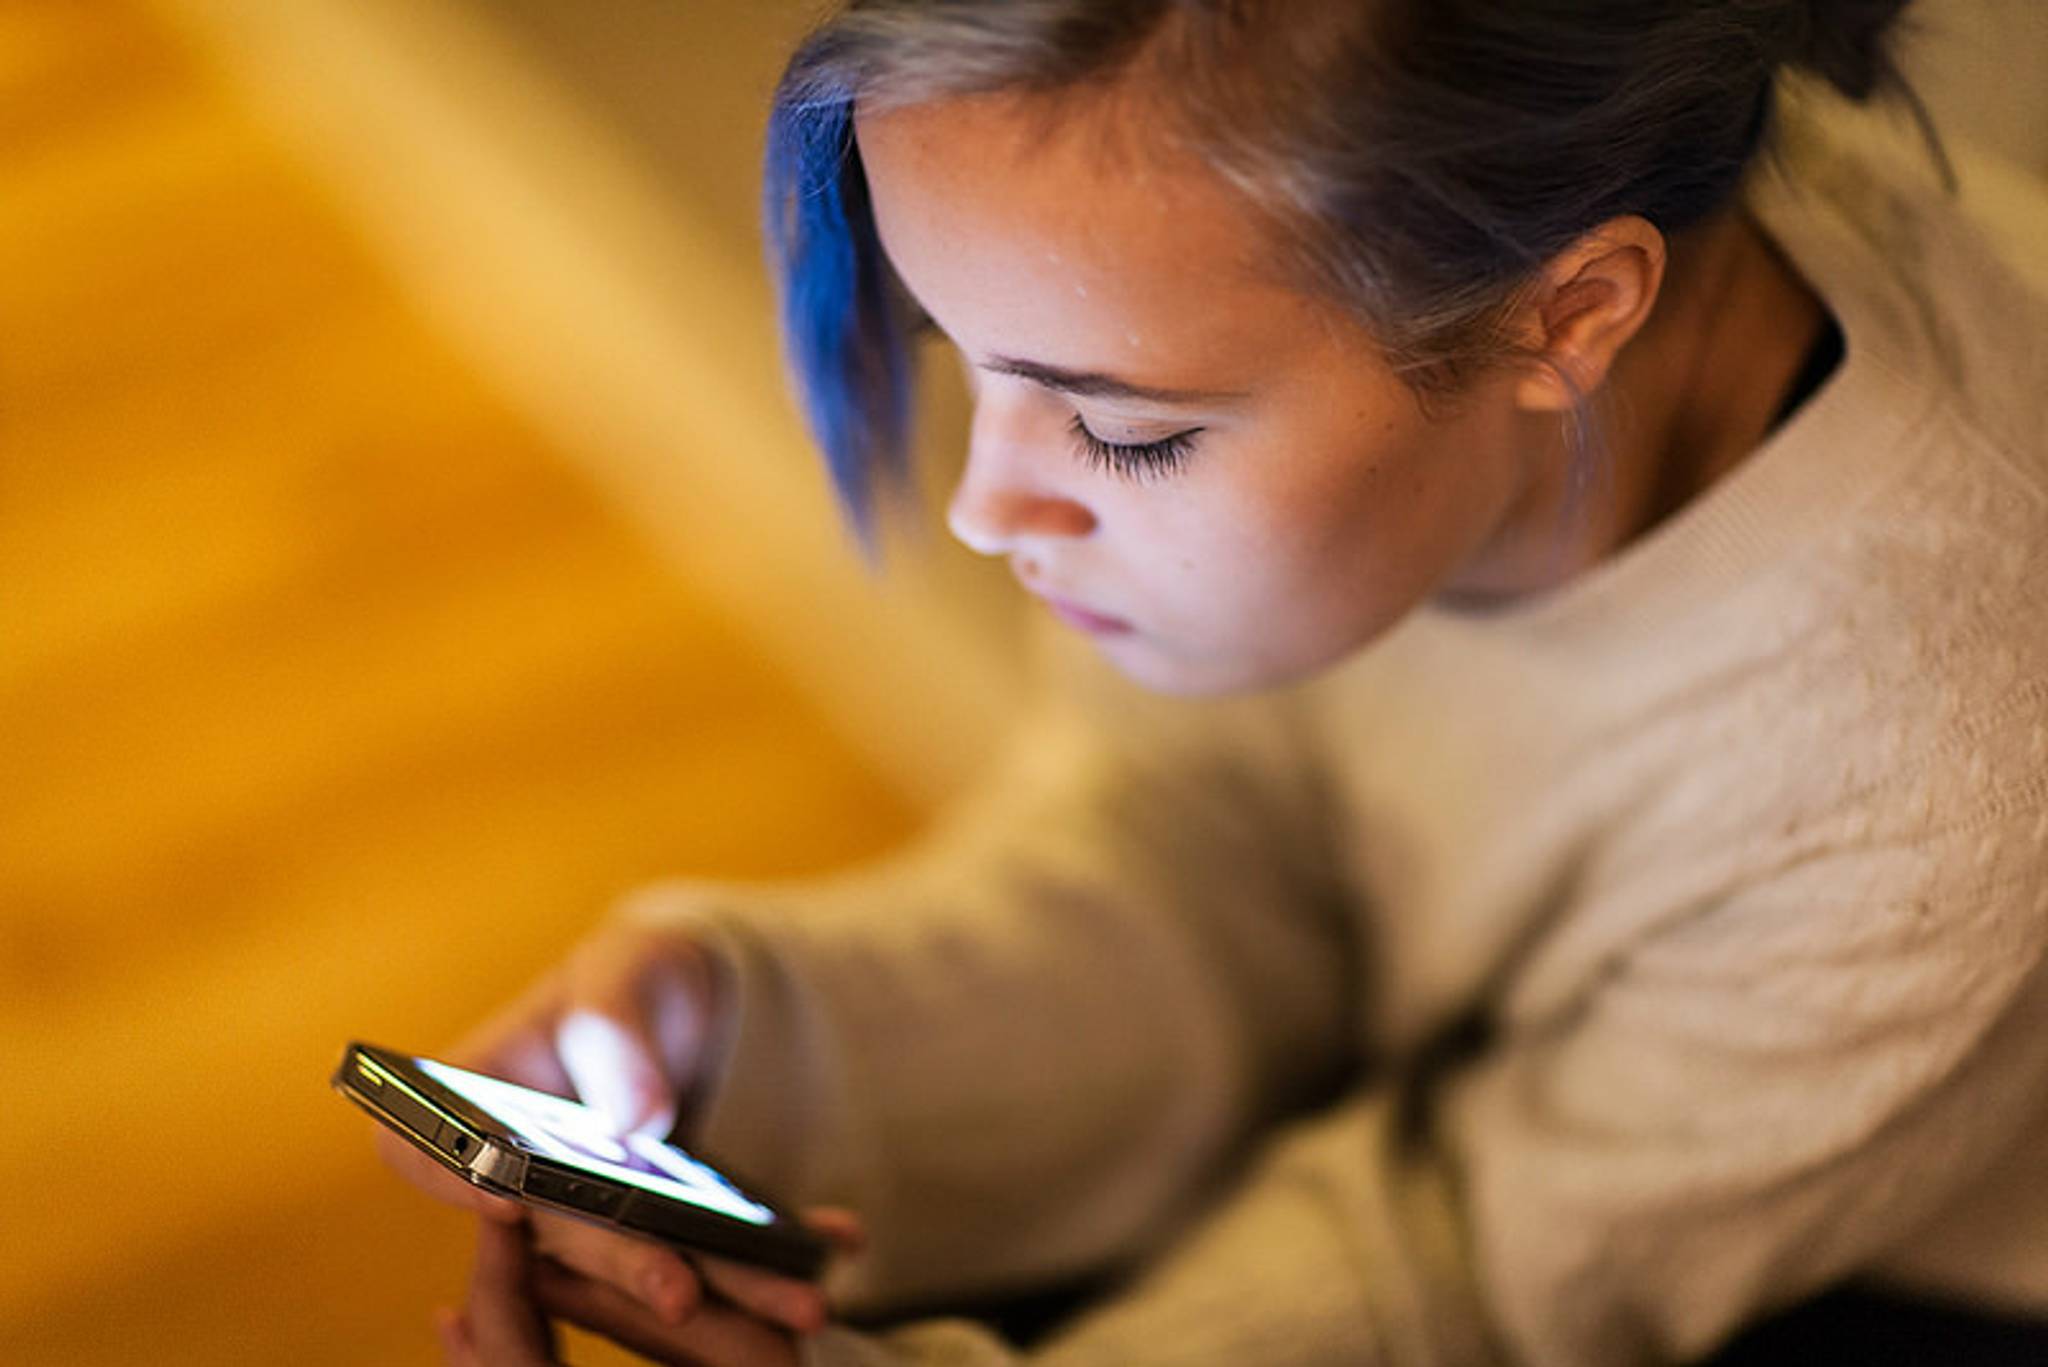 Teens are keeping their sexts a secret